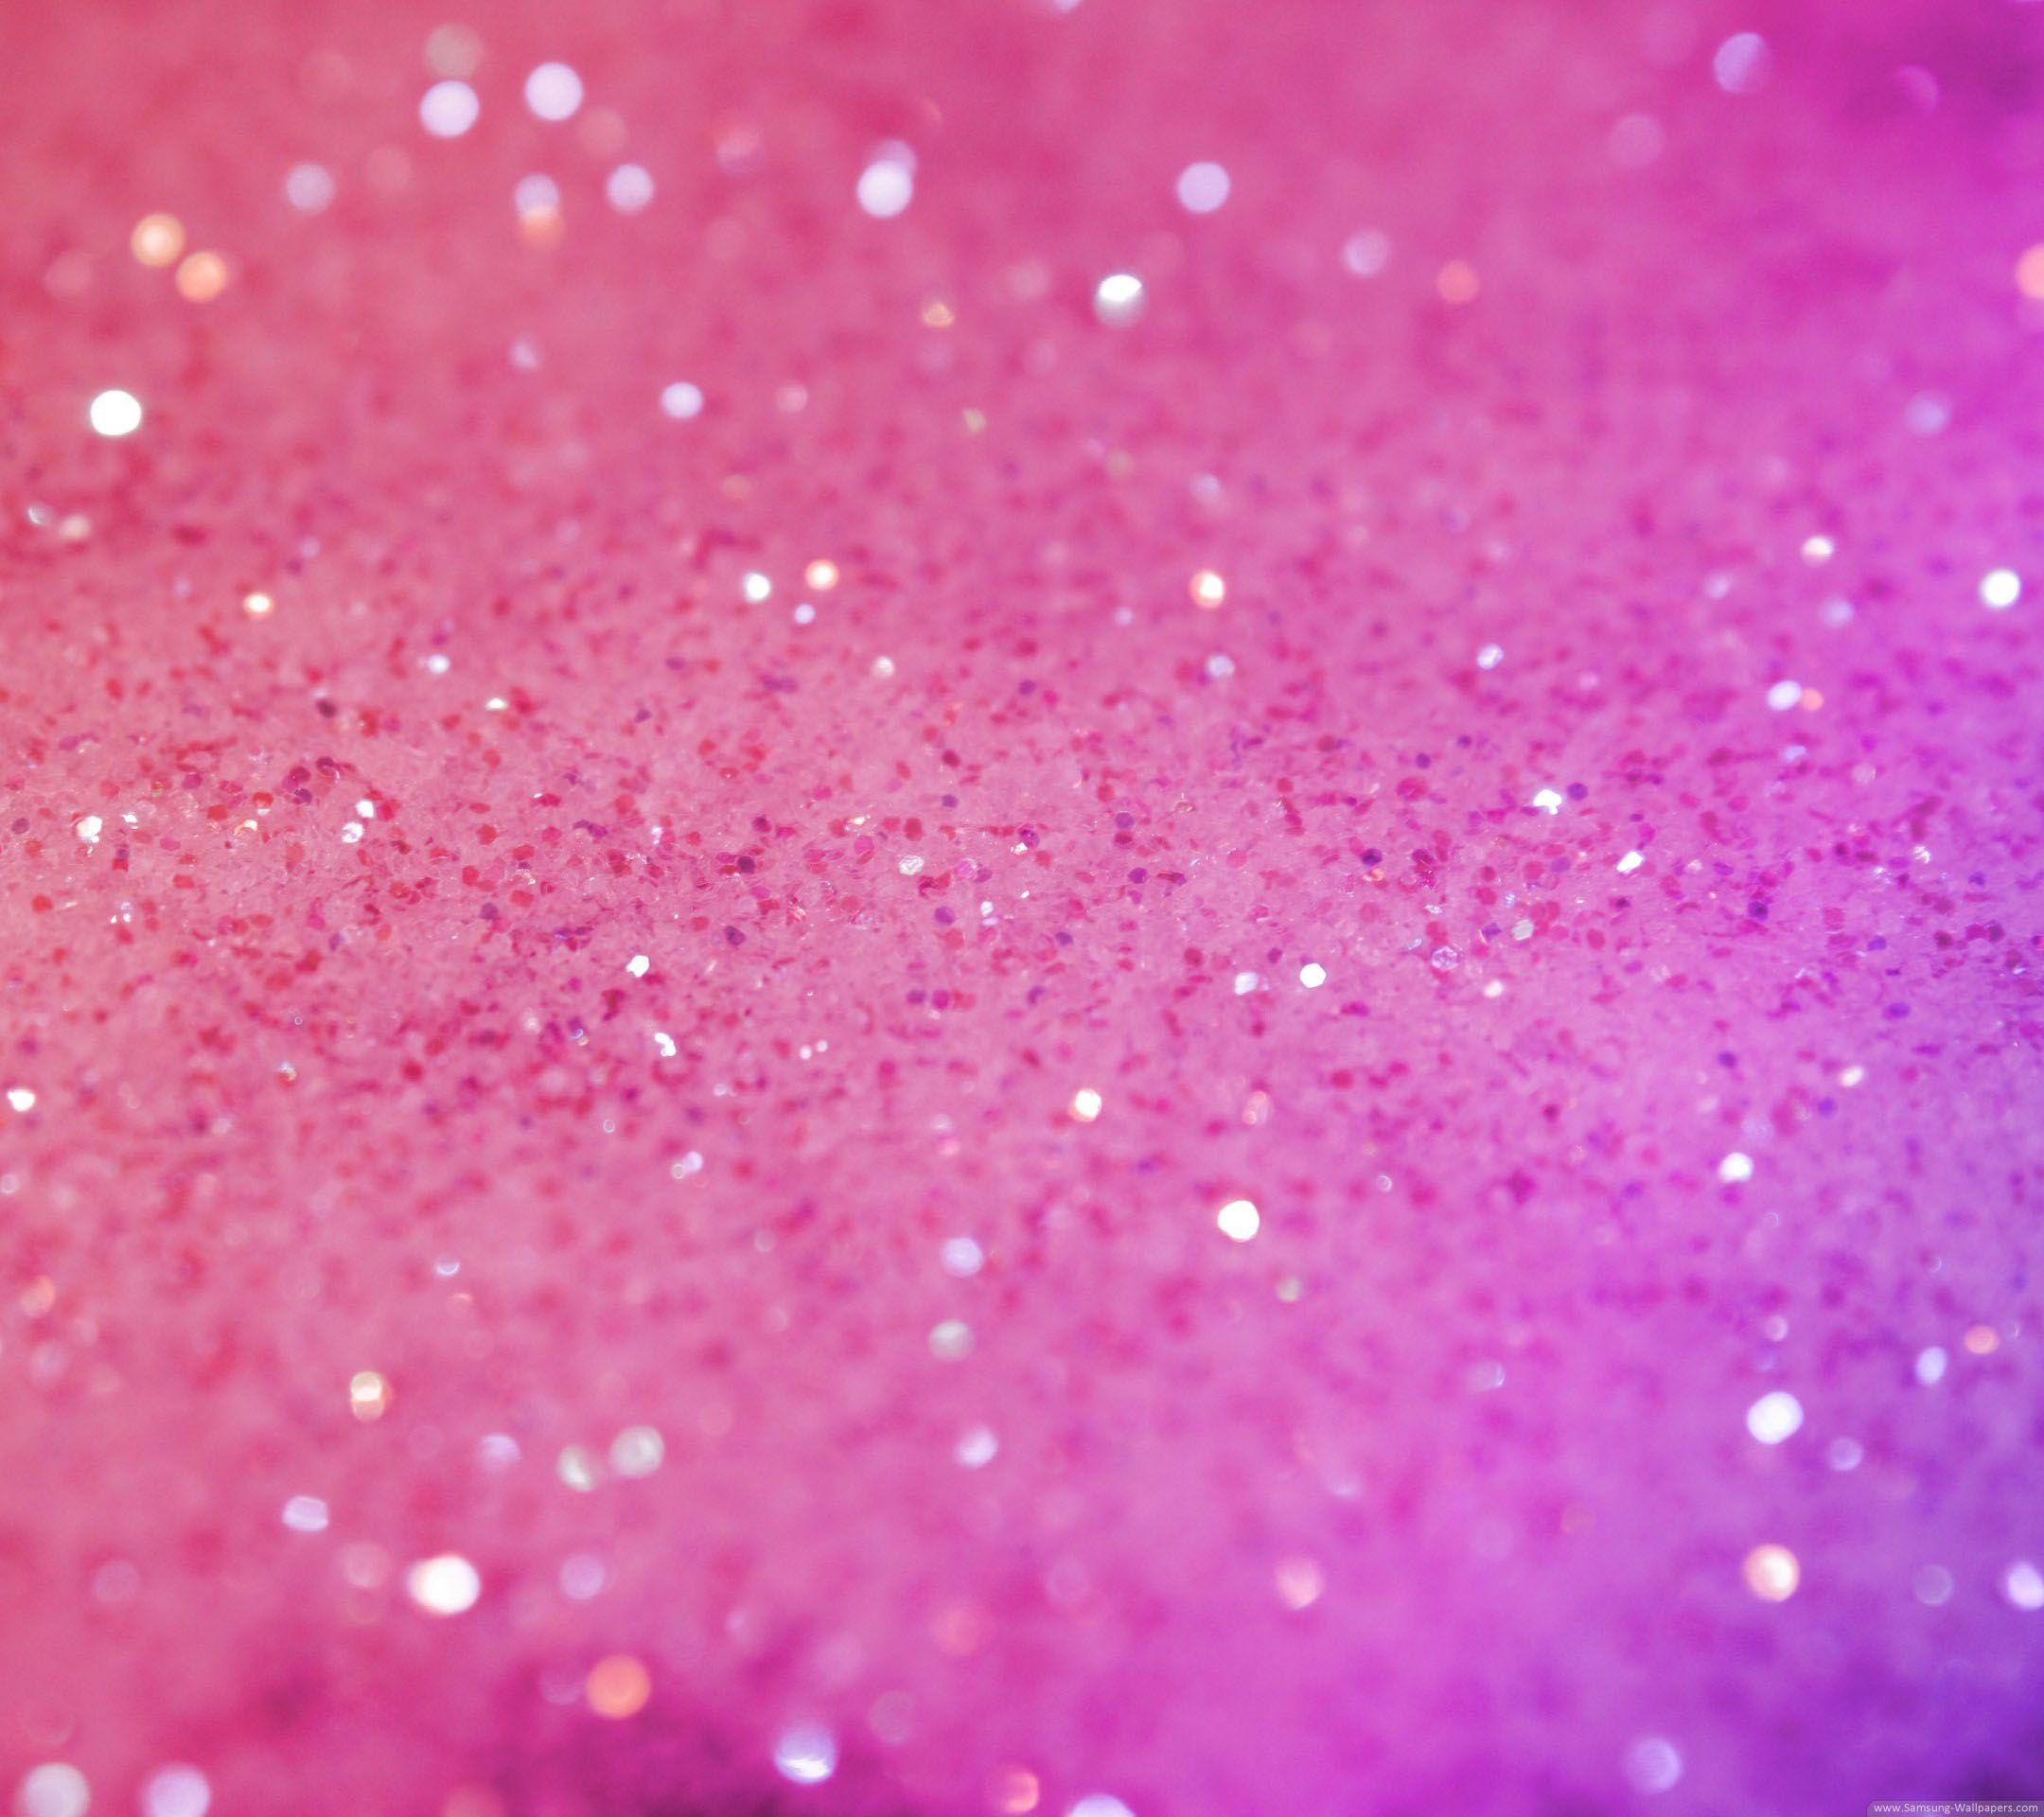 image of Hot Pink Galaxy Background - #SpaceHero